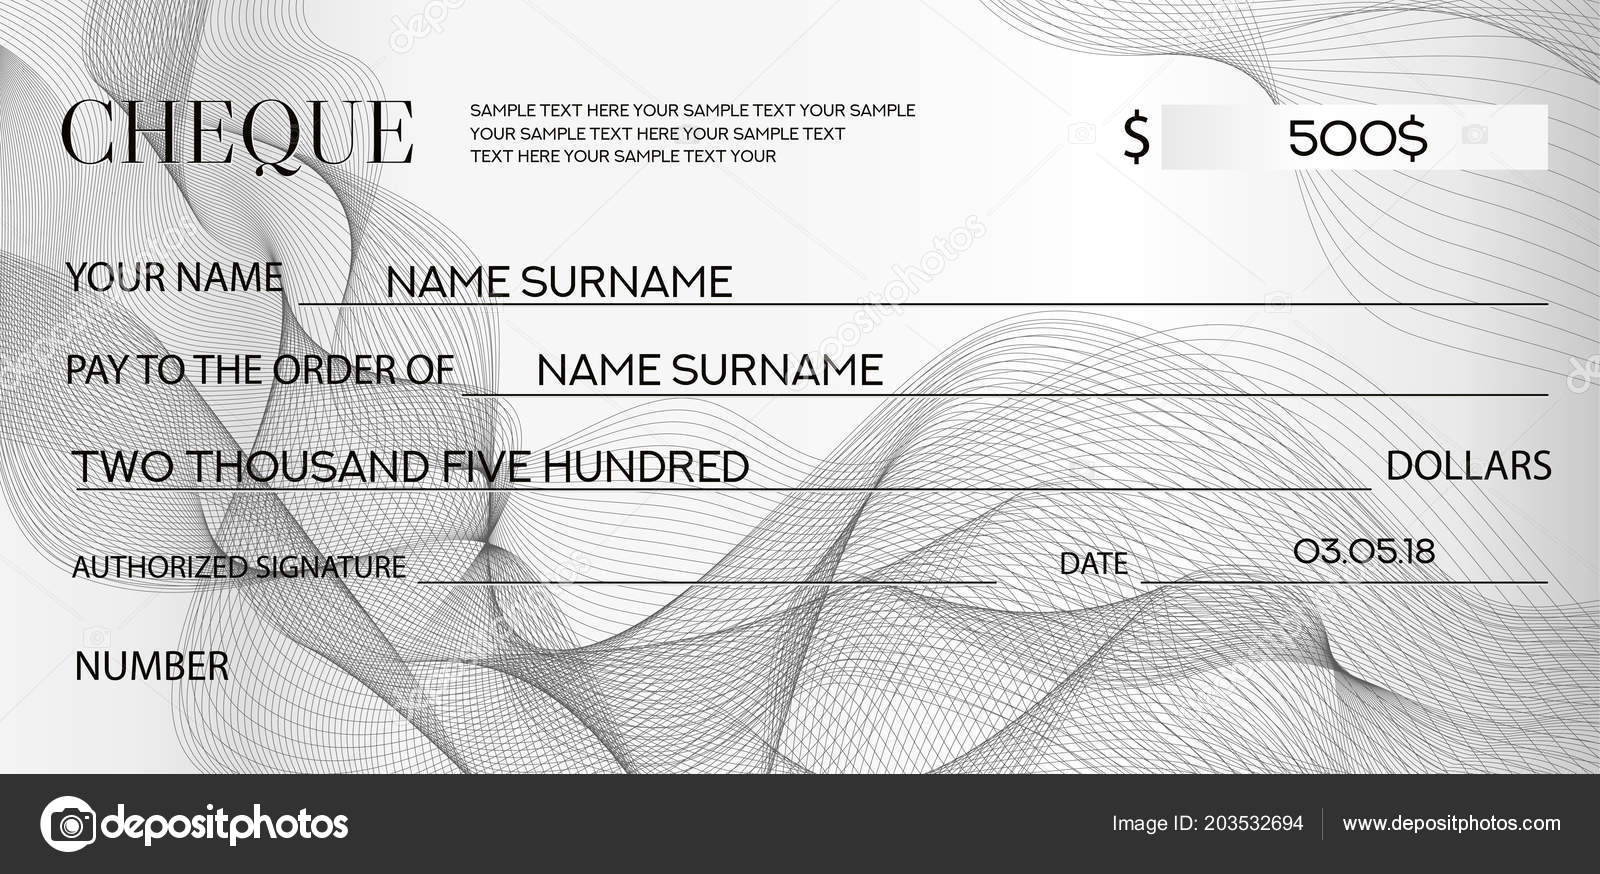 Cheque Check Template Chequebook Template Blank Bank Cheque With Regard To Blank Business Check Template